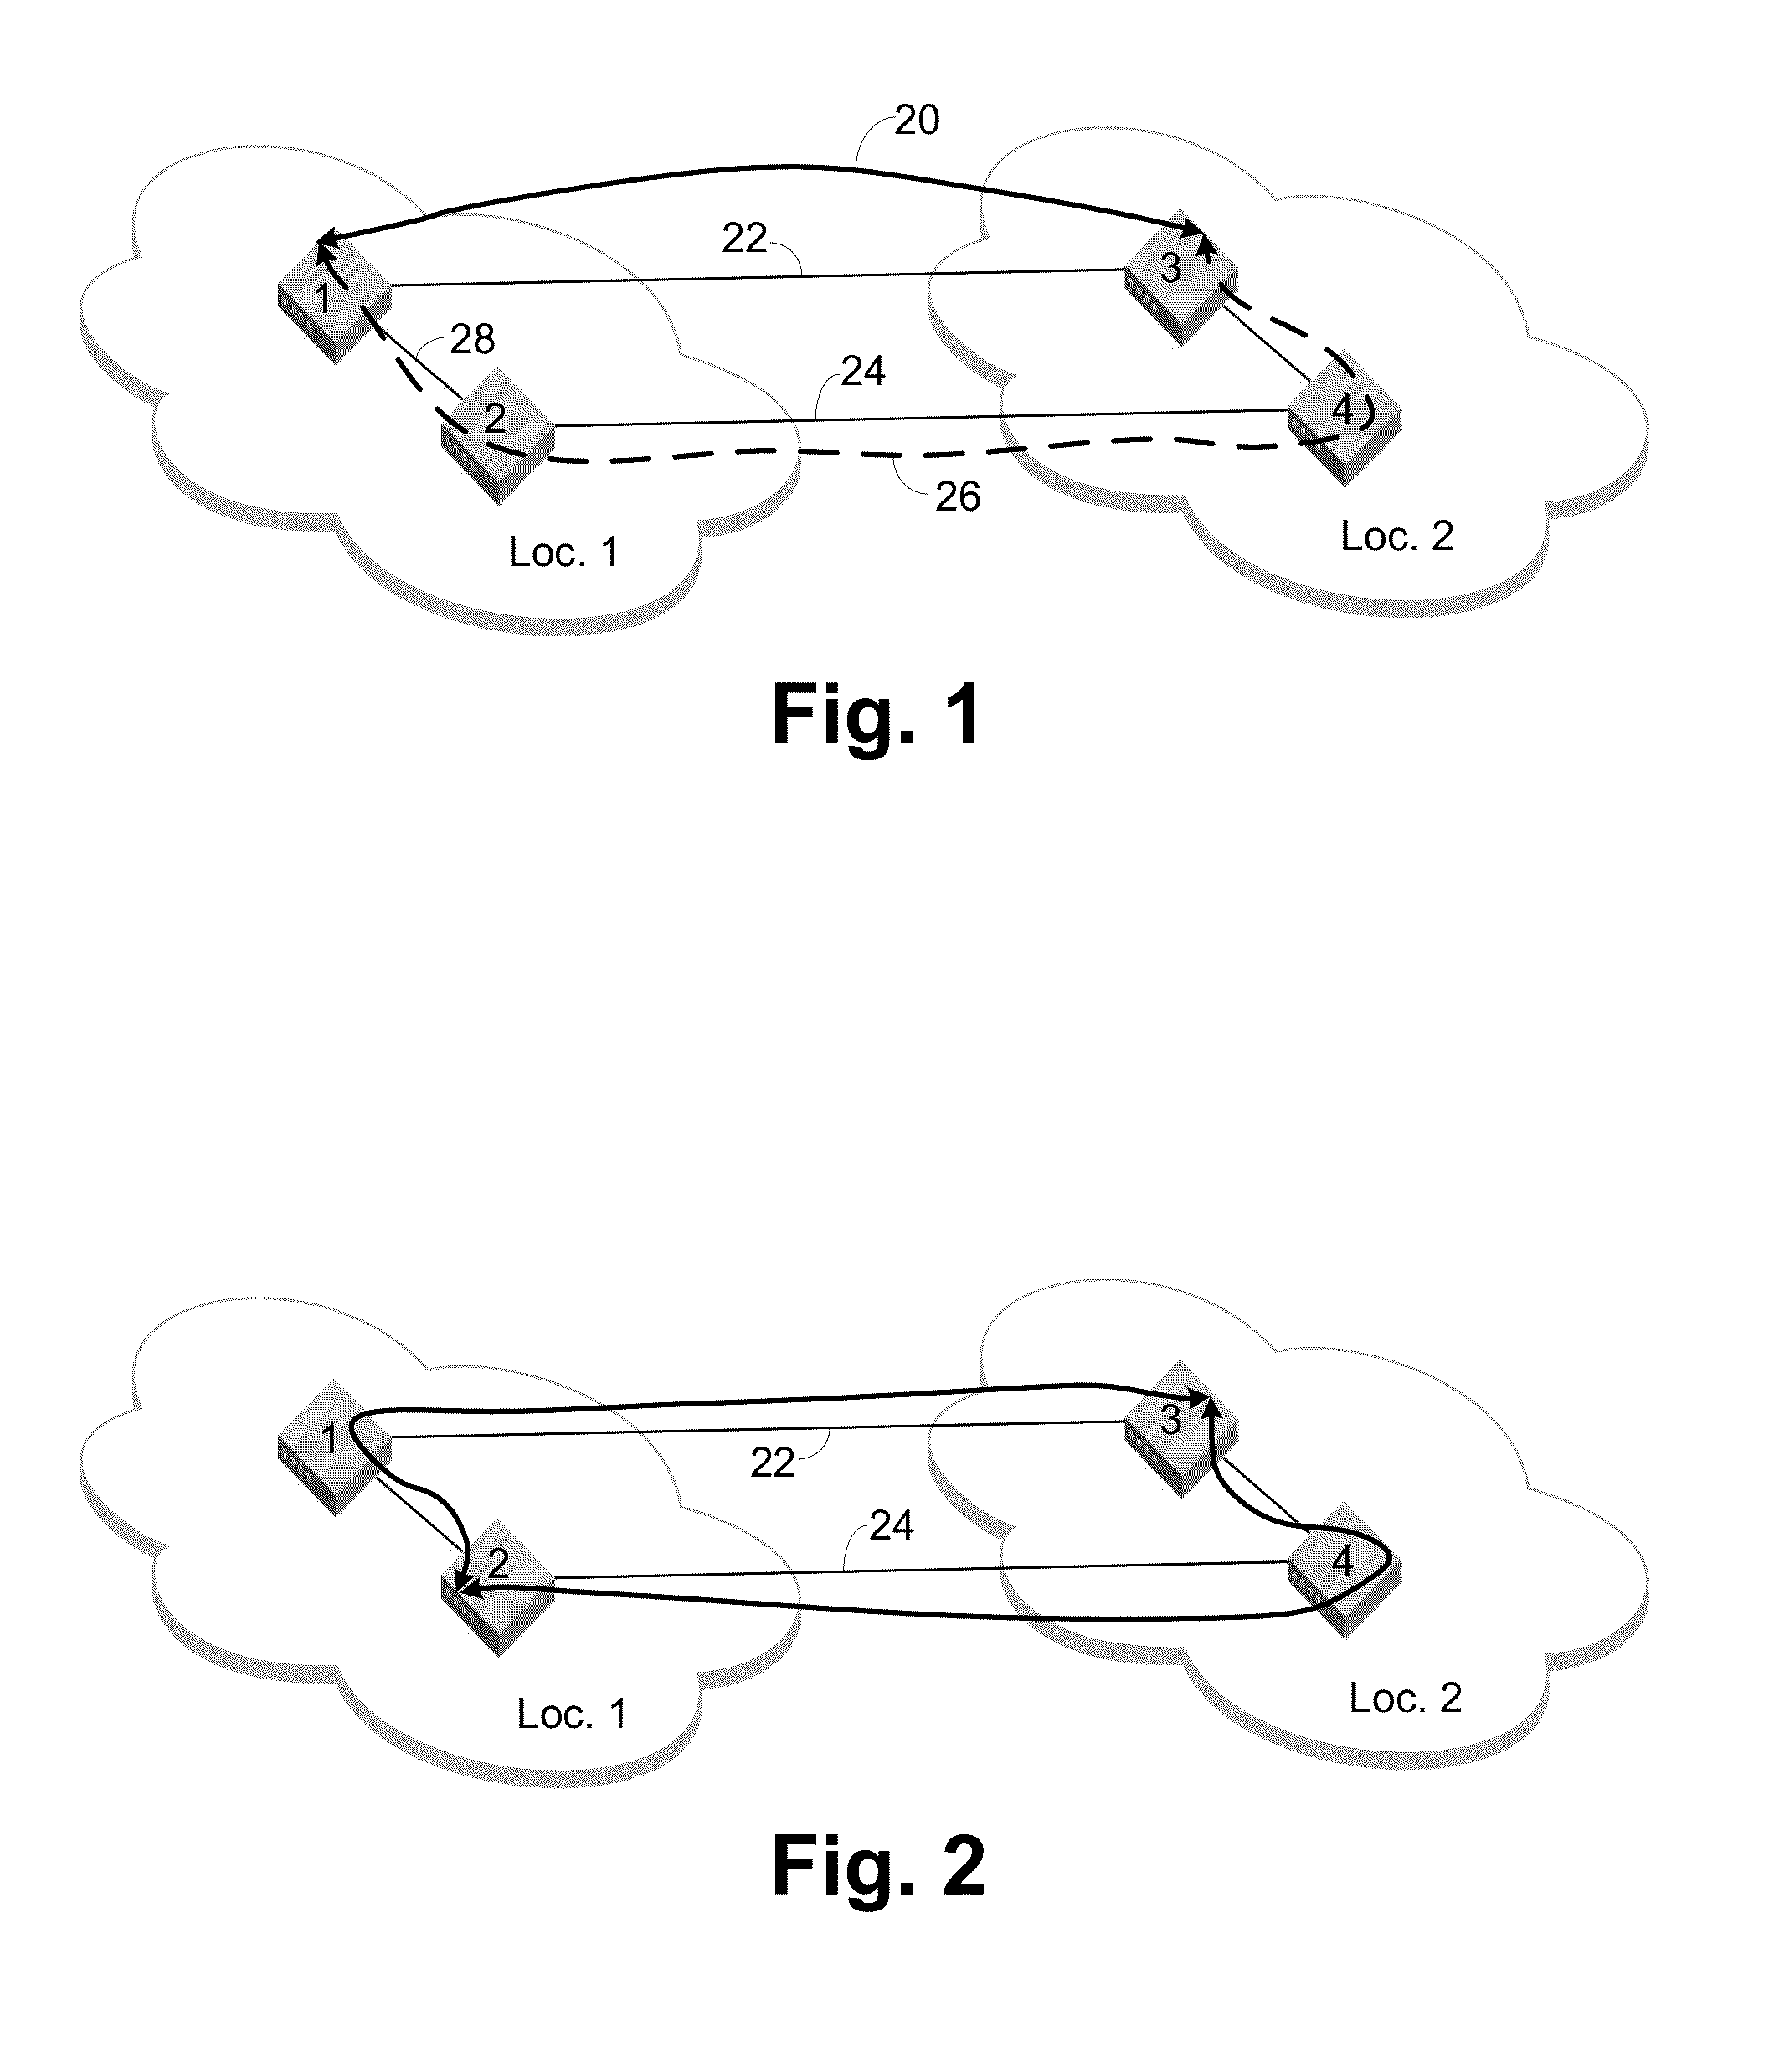 Method and Apparatus for Enhanced Routing within a Shortest Path Based Routed Network Containing Local and Long Distance Links